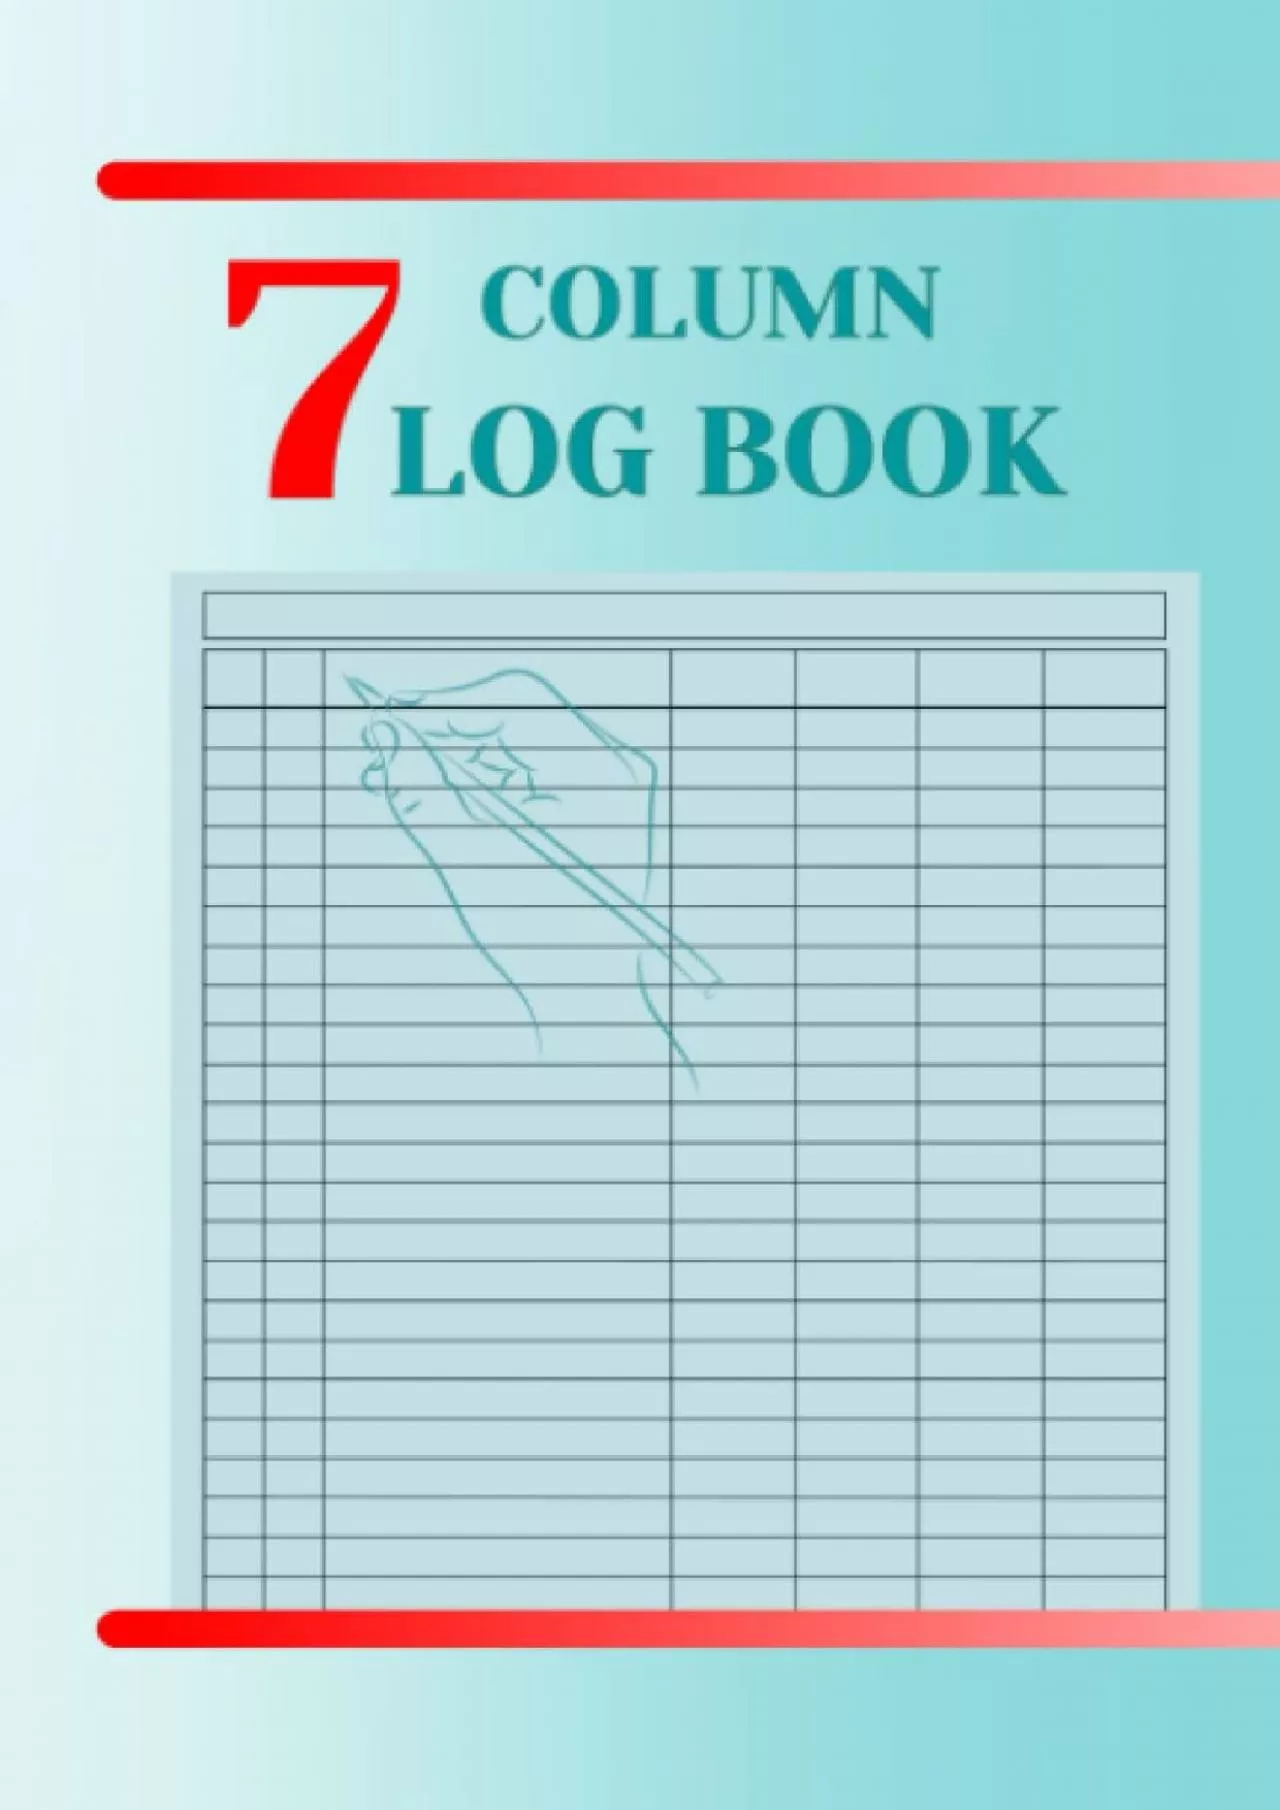 7 Column Log Book: Customizable Small Log Book to Track Income and Expense Debit and Credit